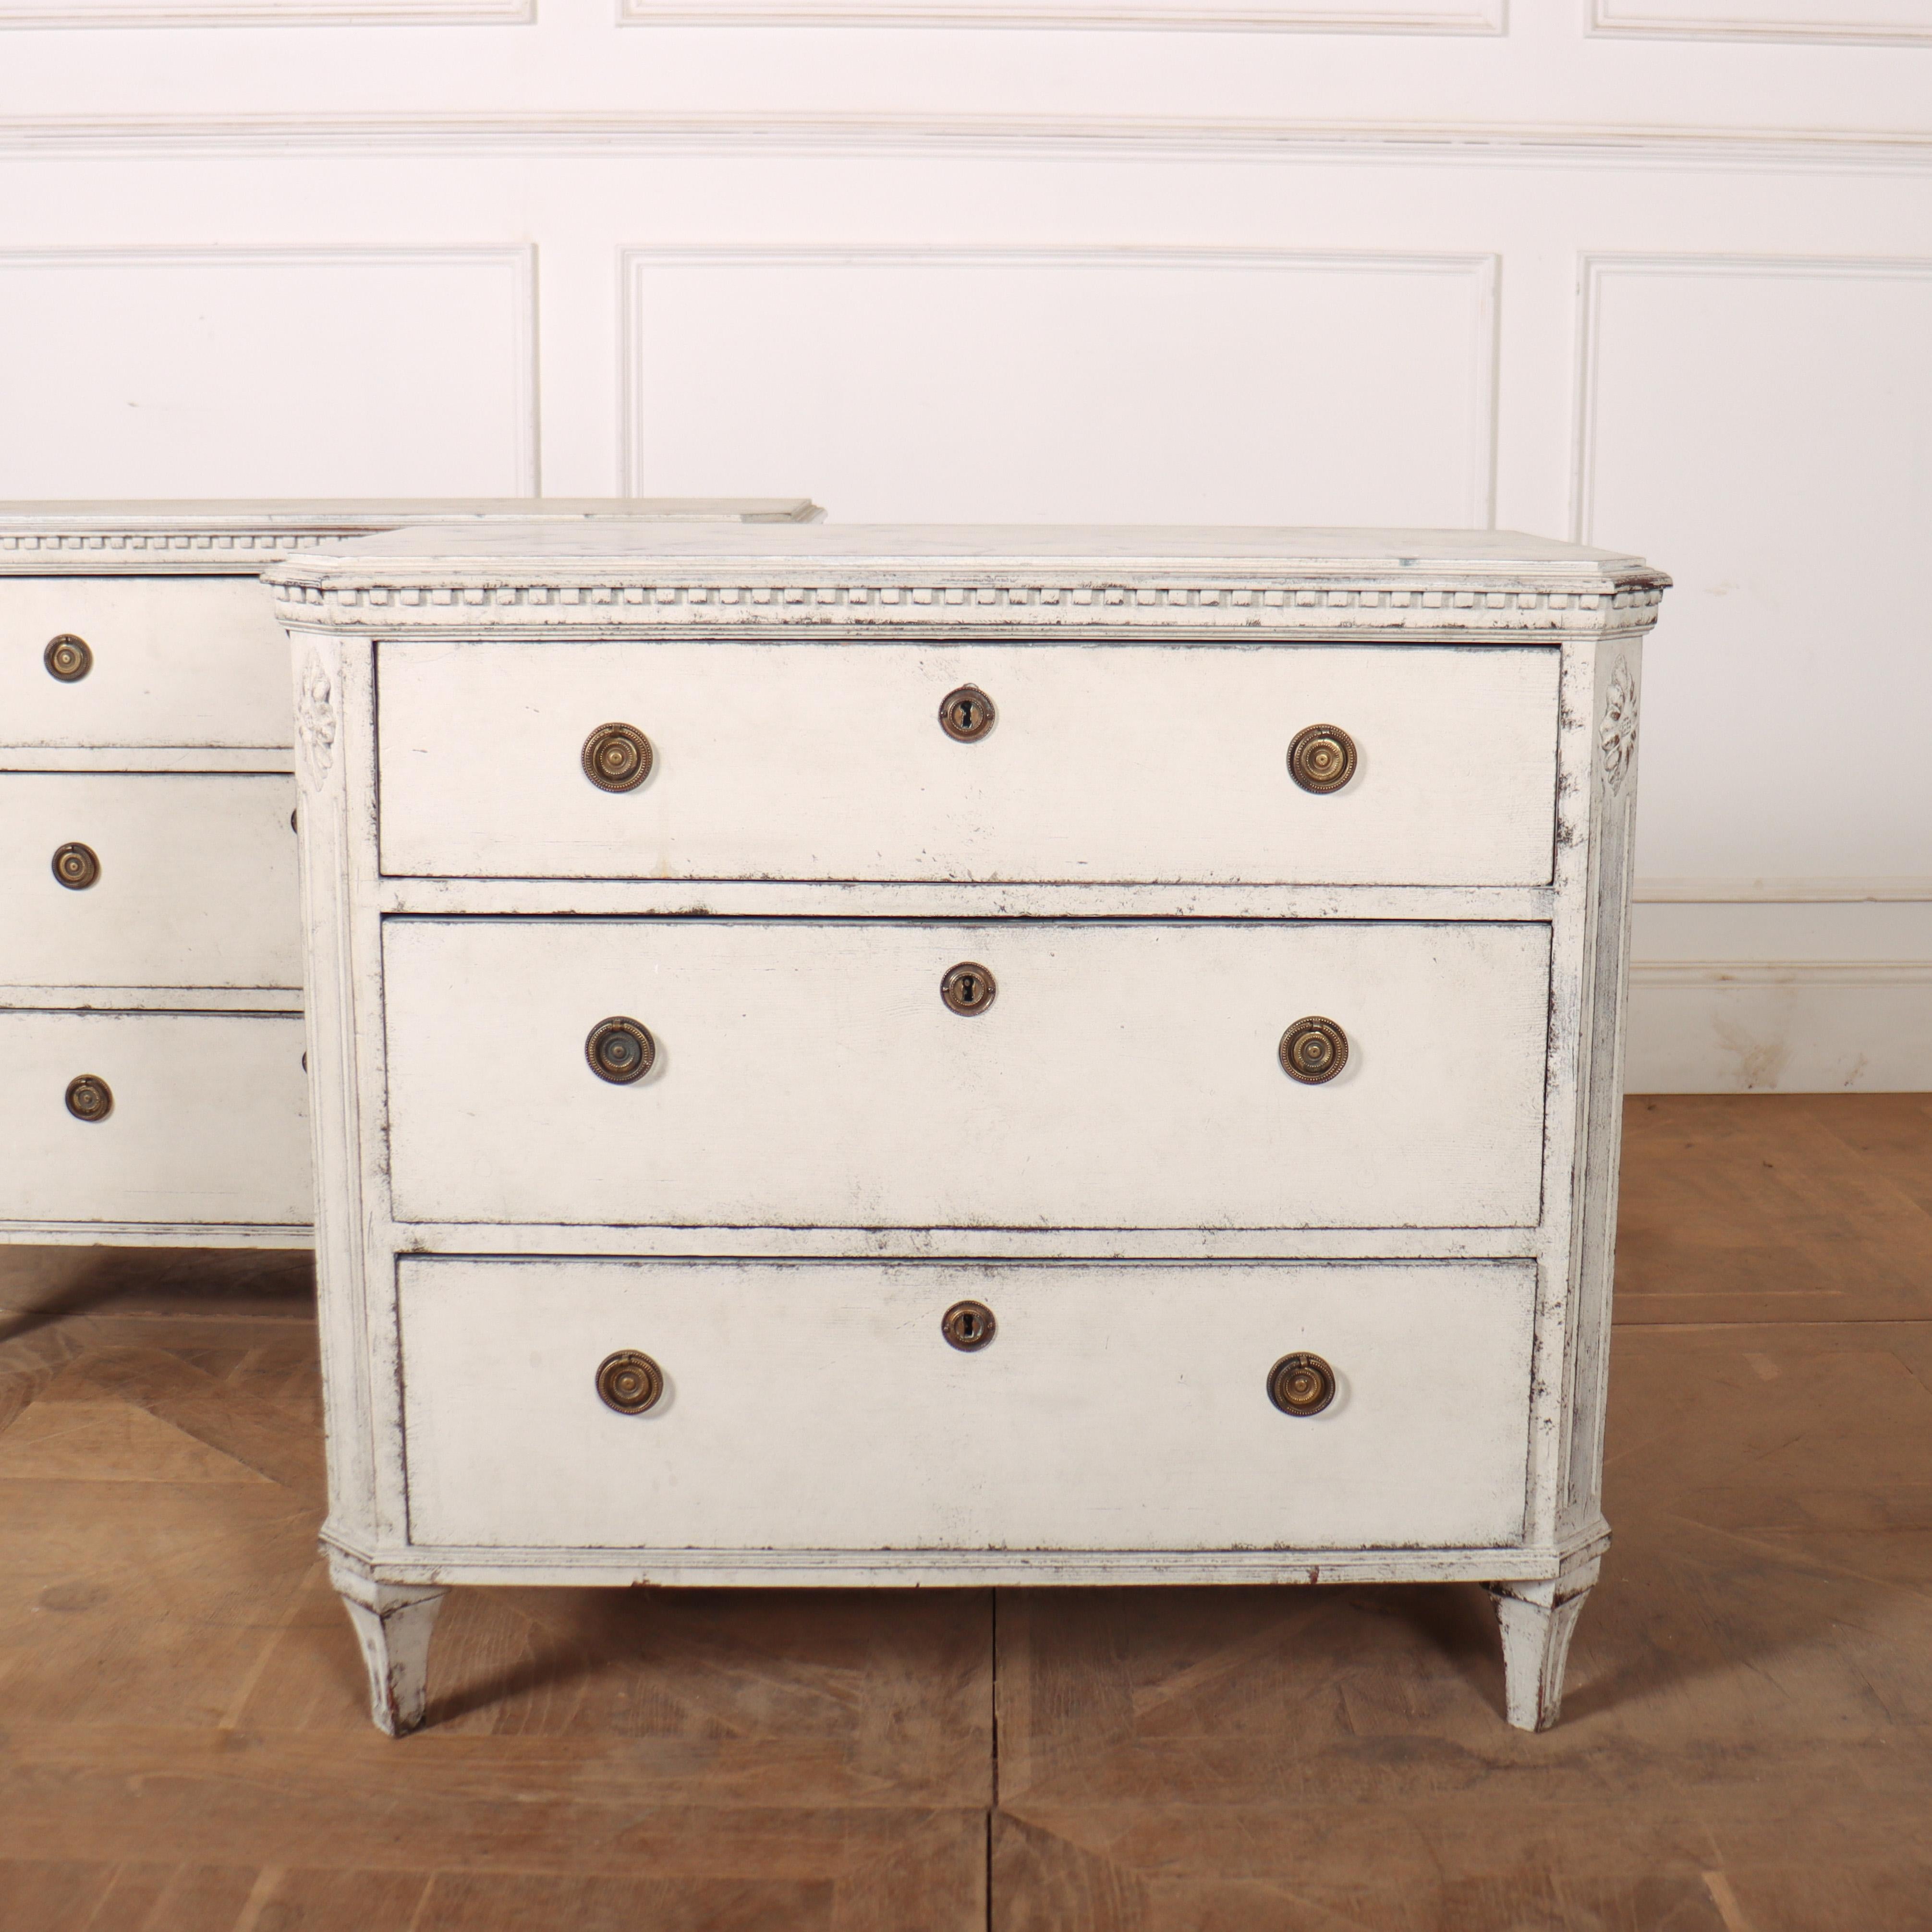 Nice pair of early 19th C Swedish 3 drawer commodes with faux marble tops. 1860.

Ref: JG17

Reference: 8343

Dimensions
33.5 inches (85 cms) Wide
18.5 inches (47 cms) Deep
30 inches (76 cms) High